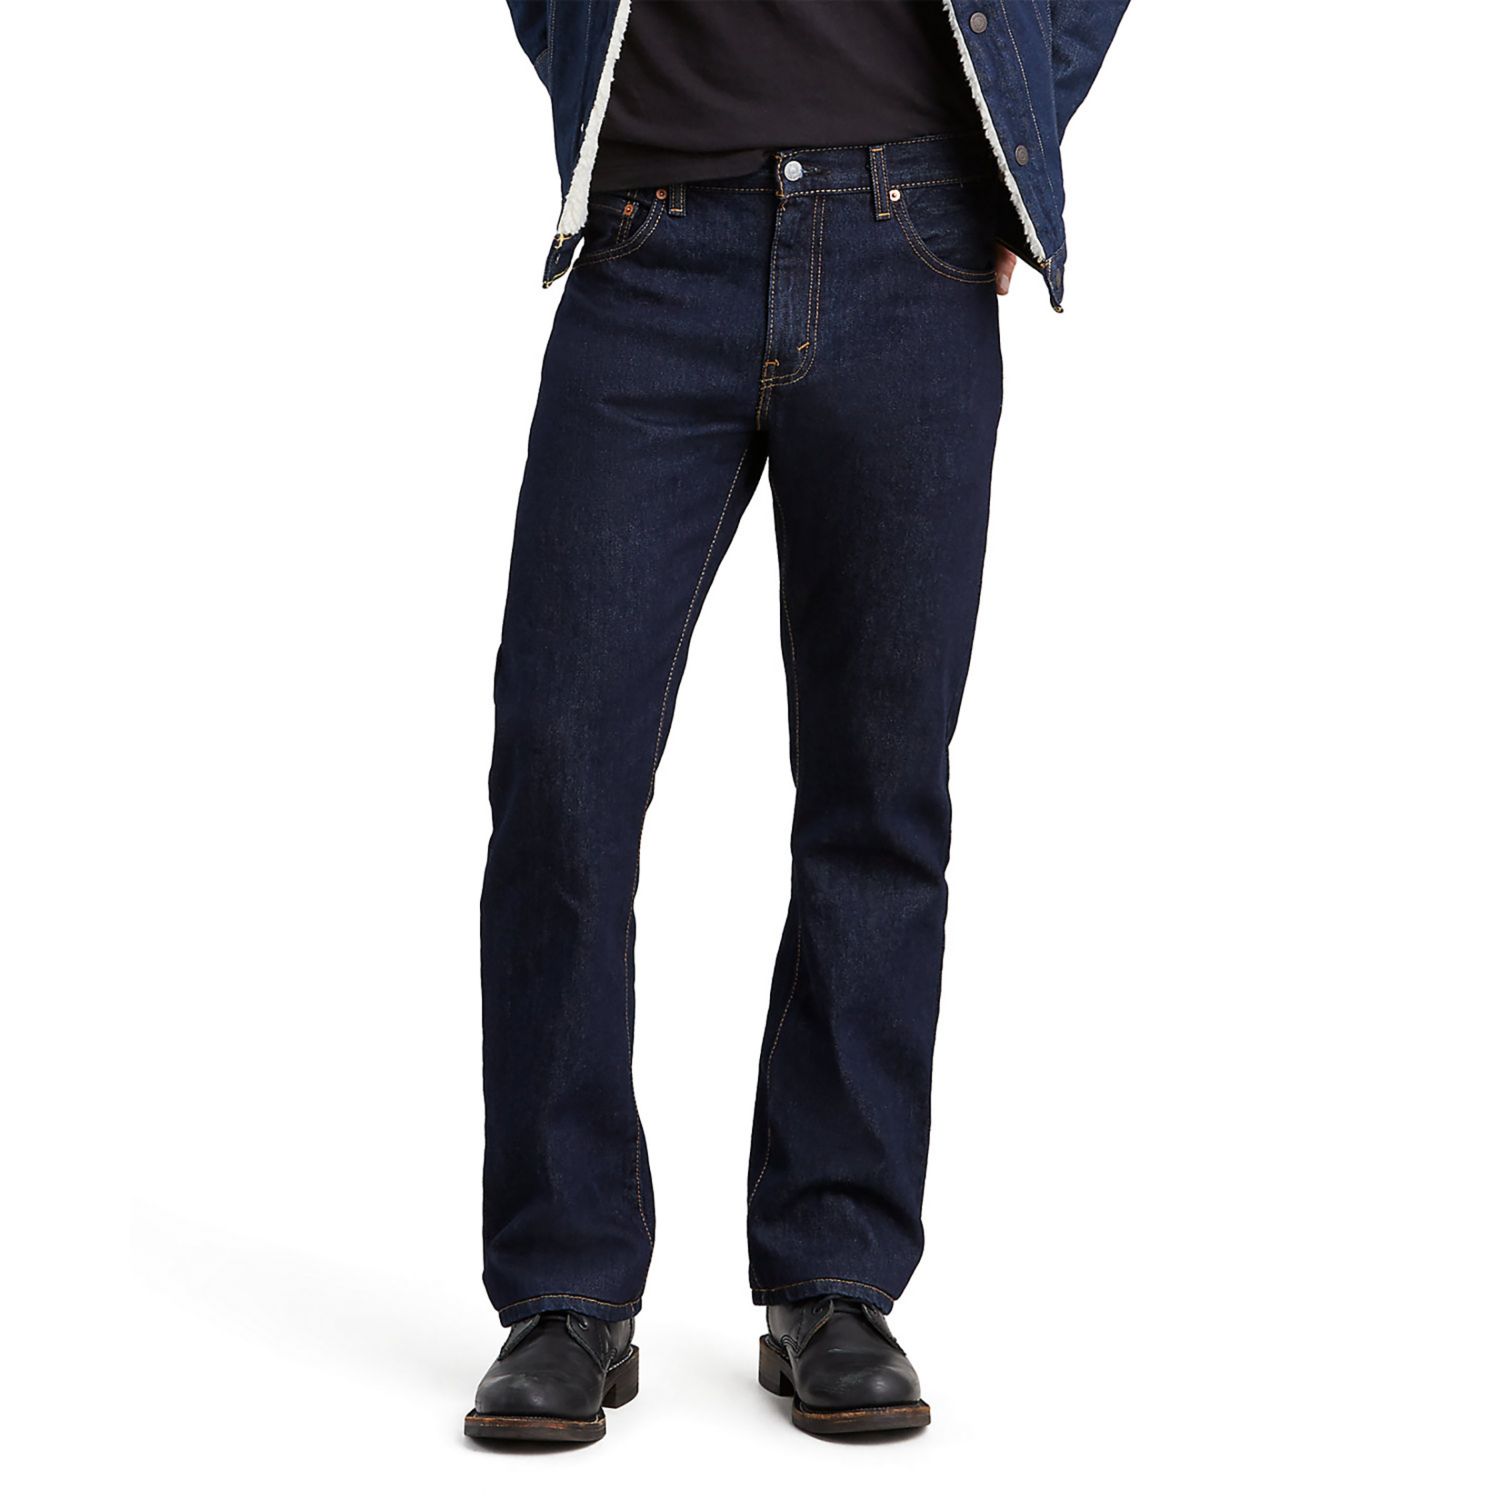 Image for Levi's Men's 517™ Bootcut Jeans at Kohl's.